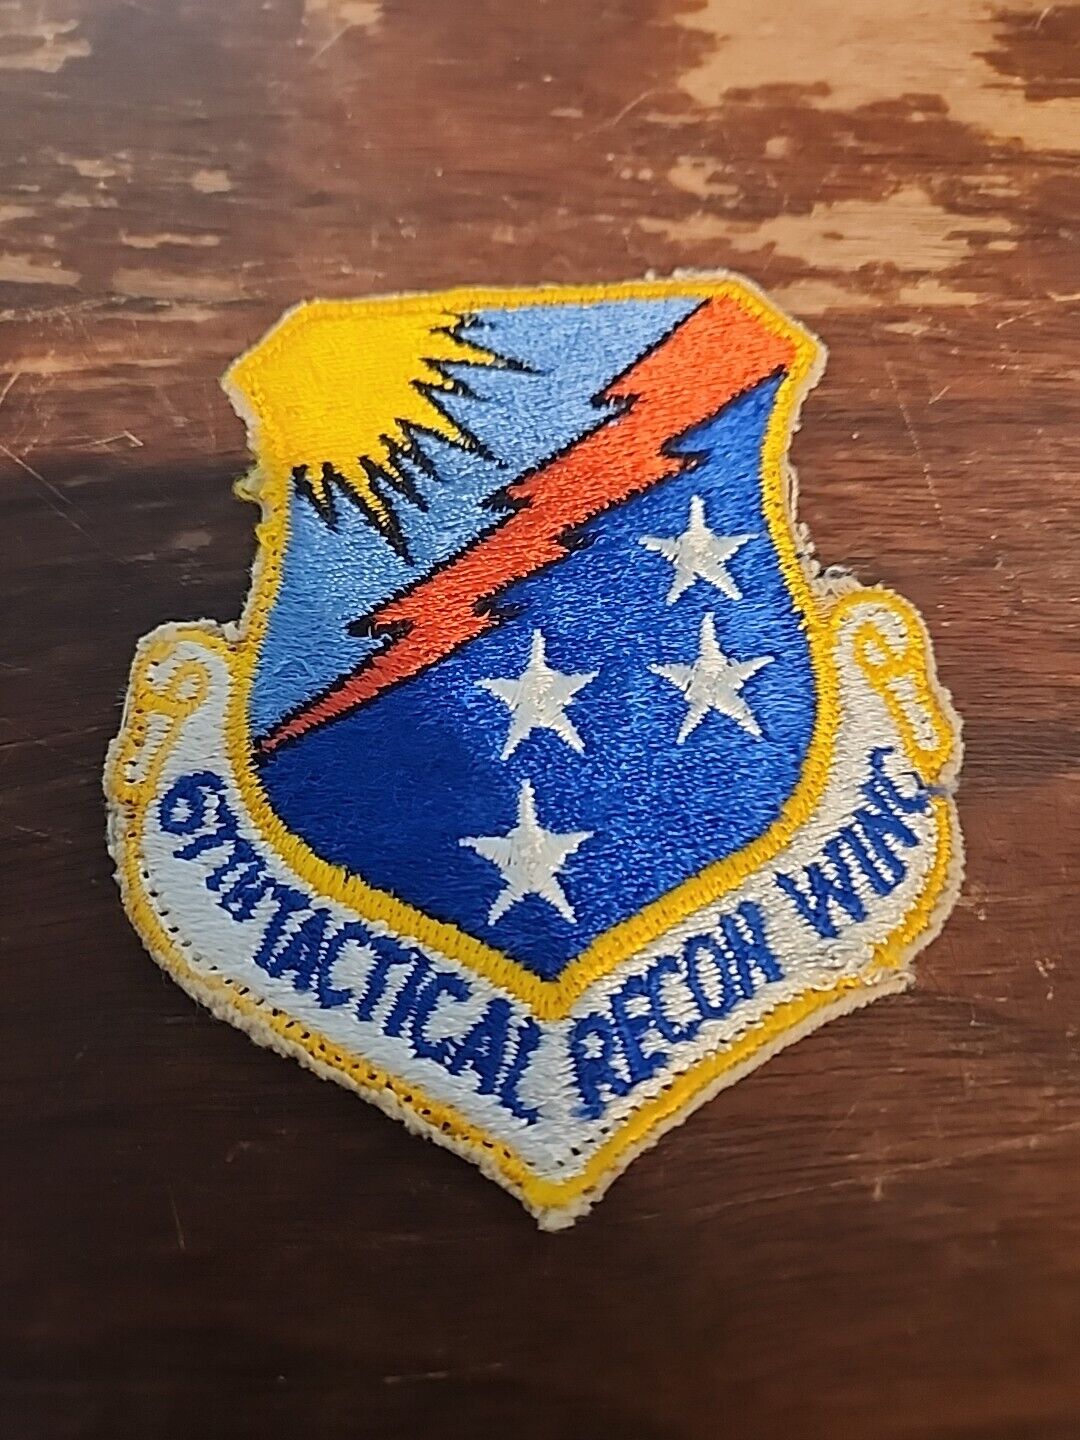 ORIGINAL USAF 67th TACTICAL RECON WING PATCH  FULL COLOR 